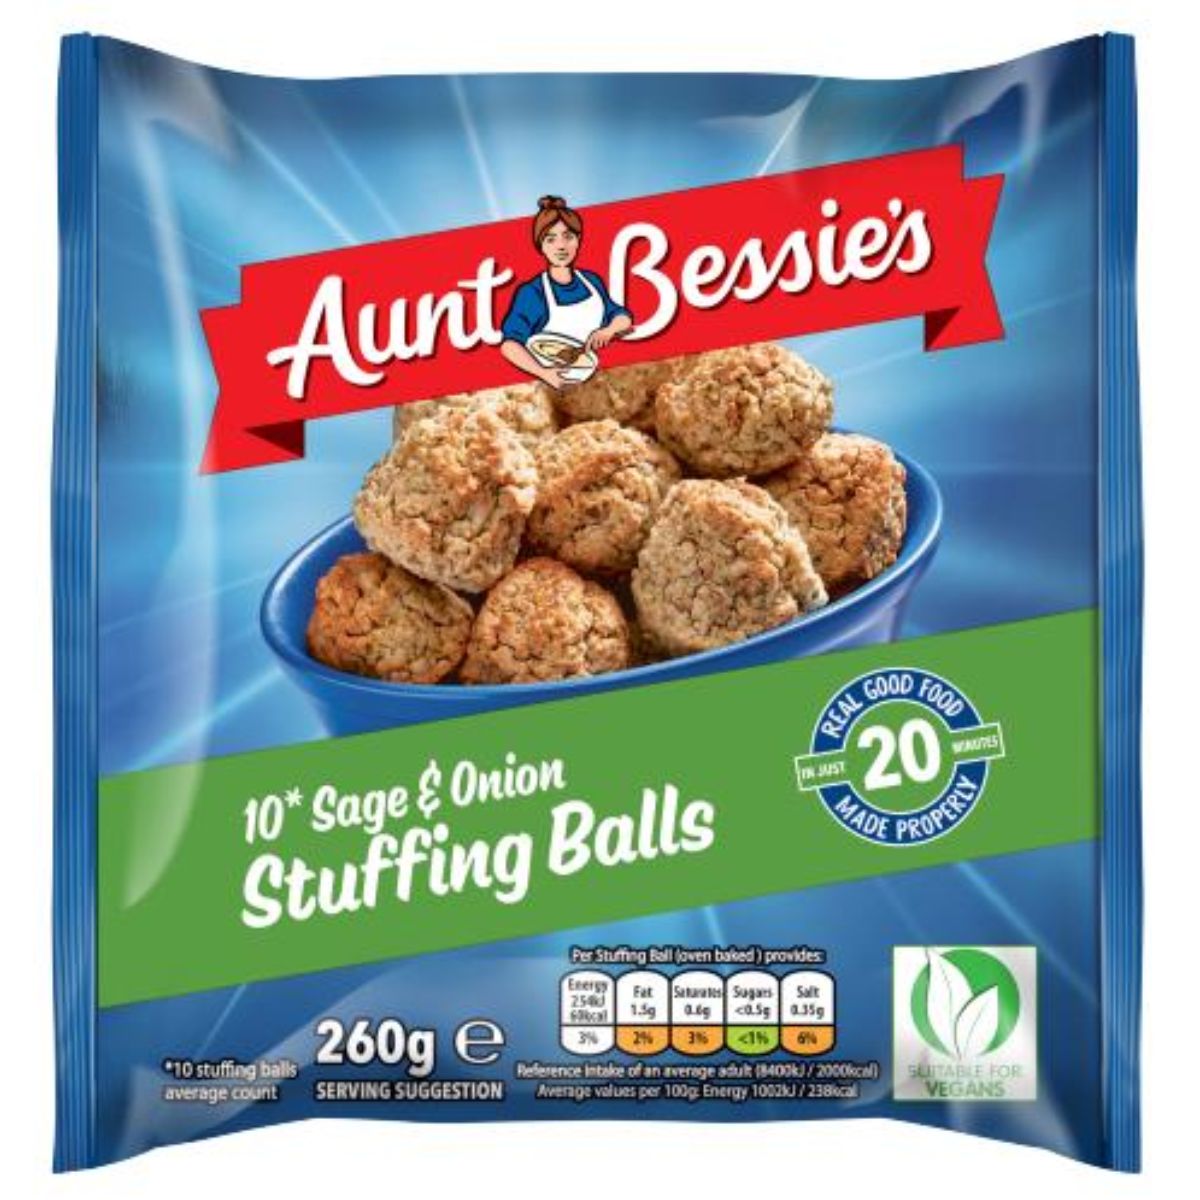 A package of Aunt Bessies - 10 Sage & Onion Stuffing Balls - 260g on a blue background.